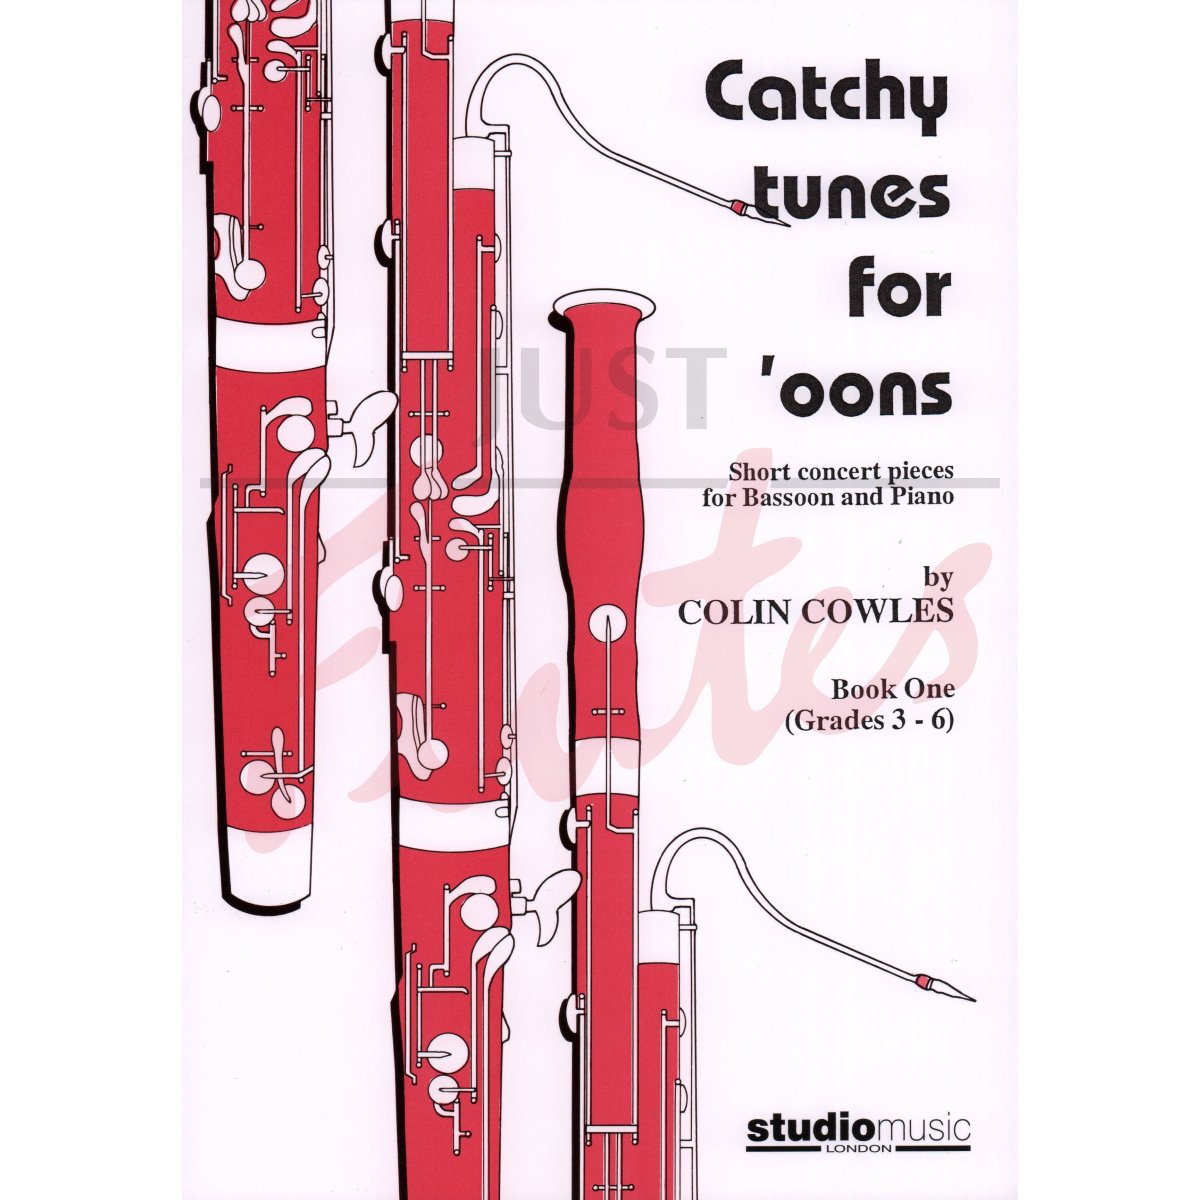 Catchy Tunes for 'Oons Book 1 for Bassoon